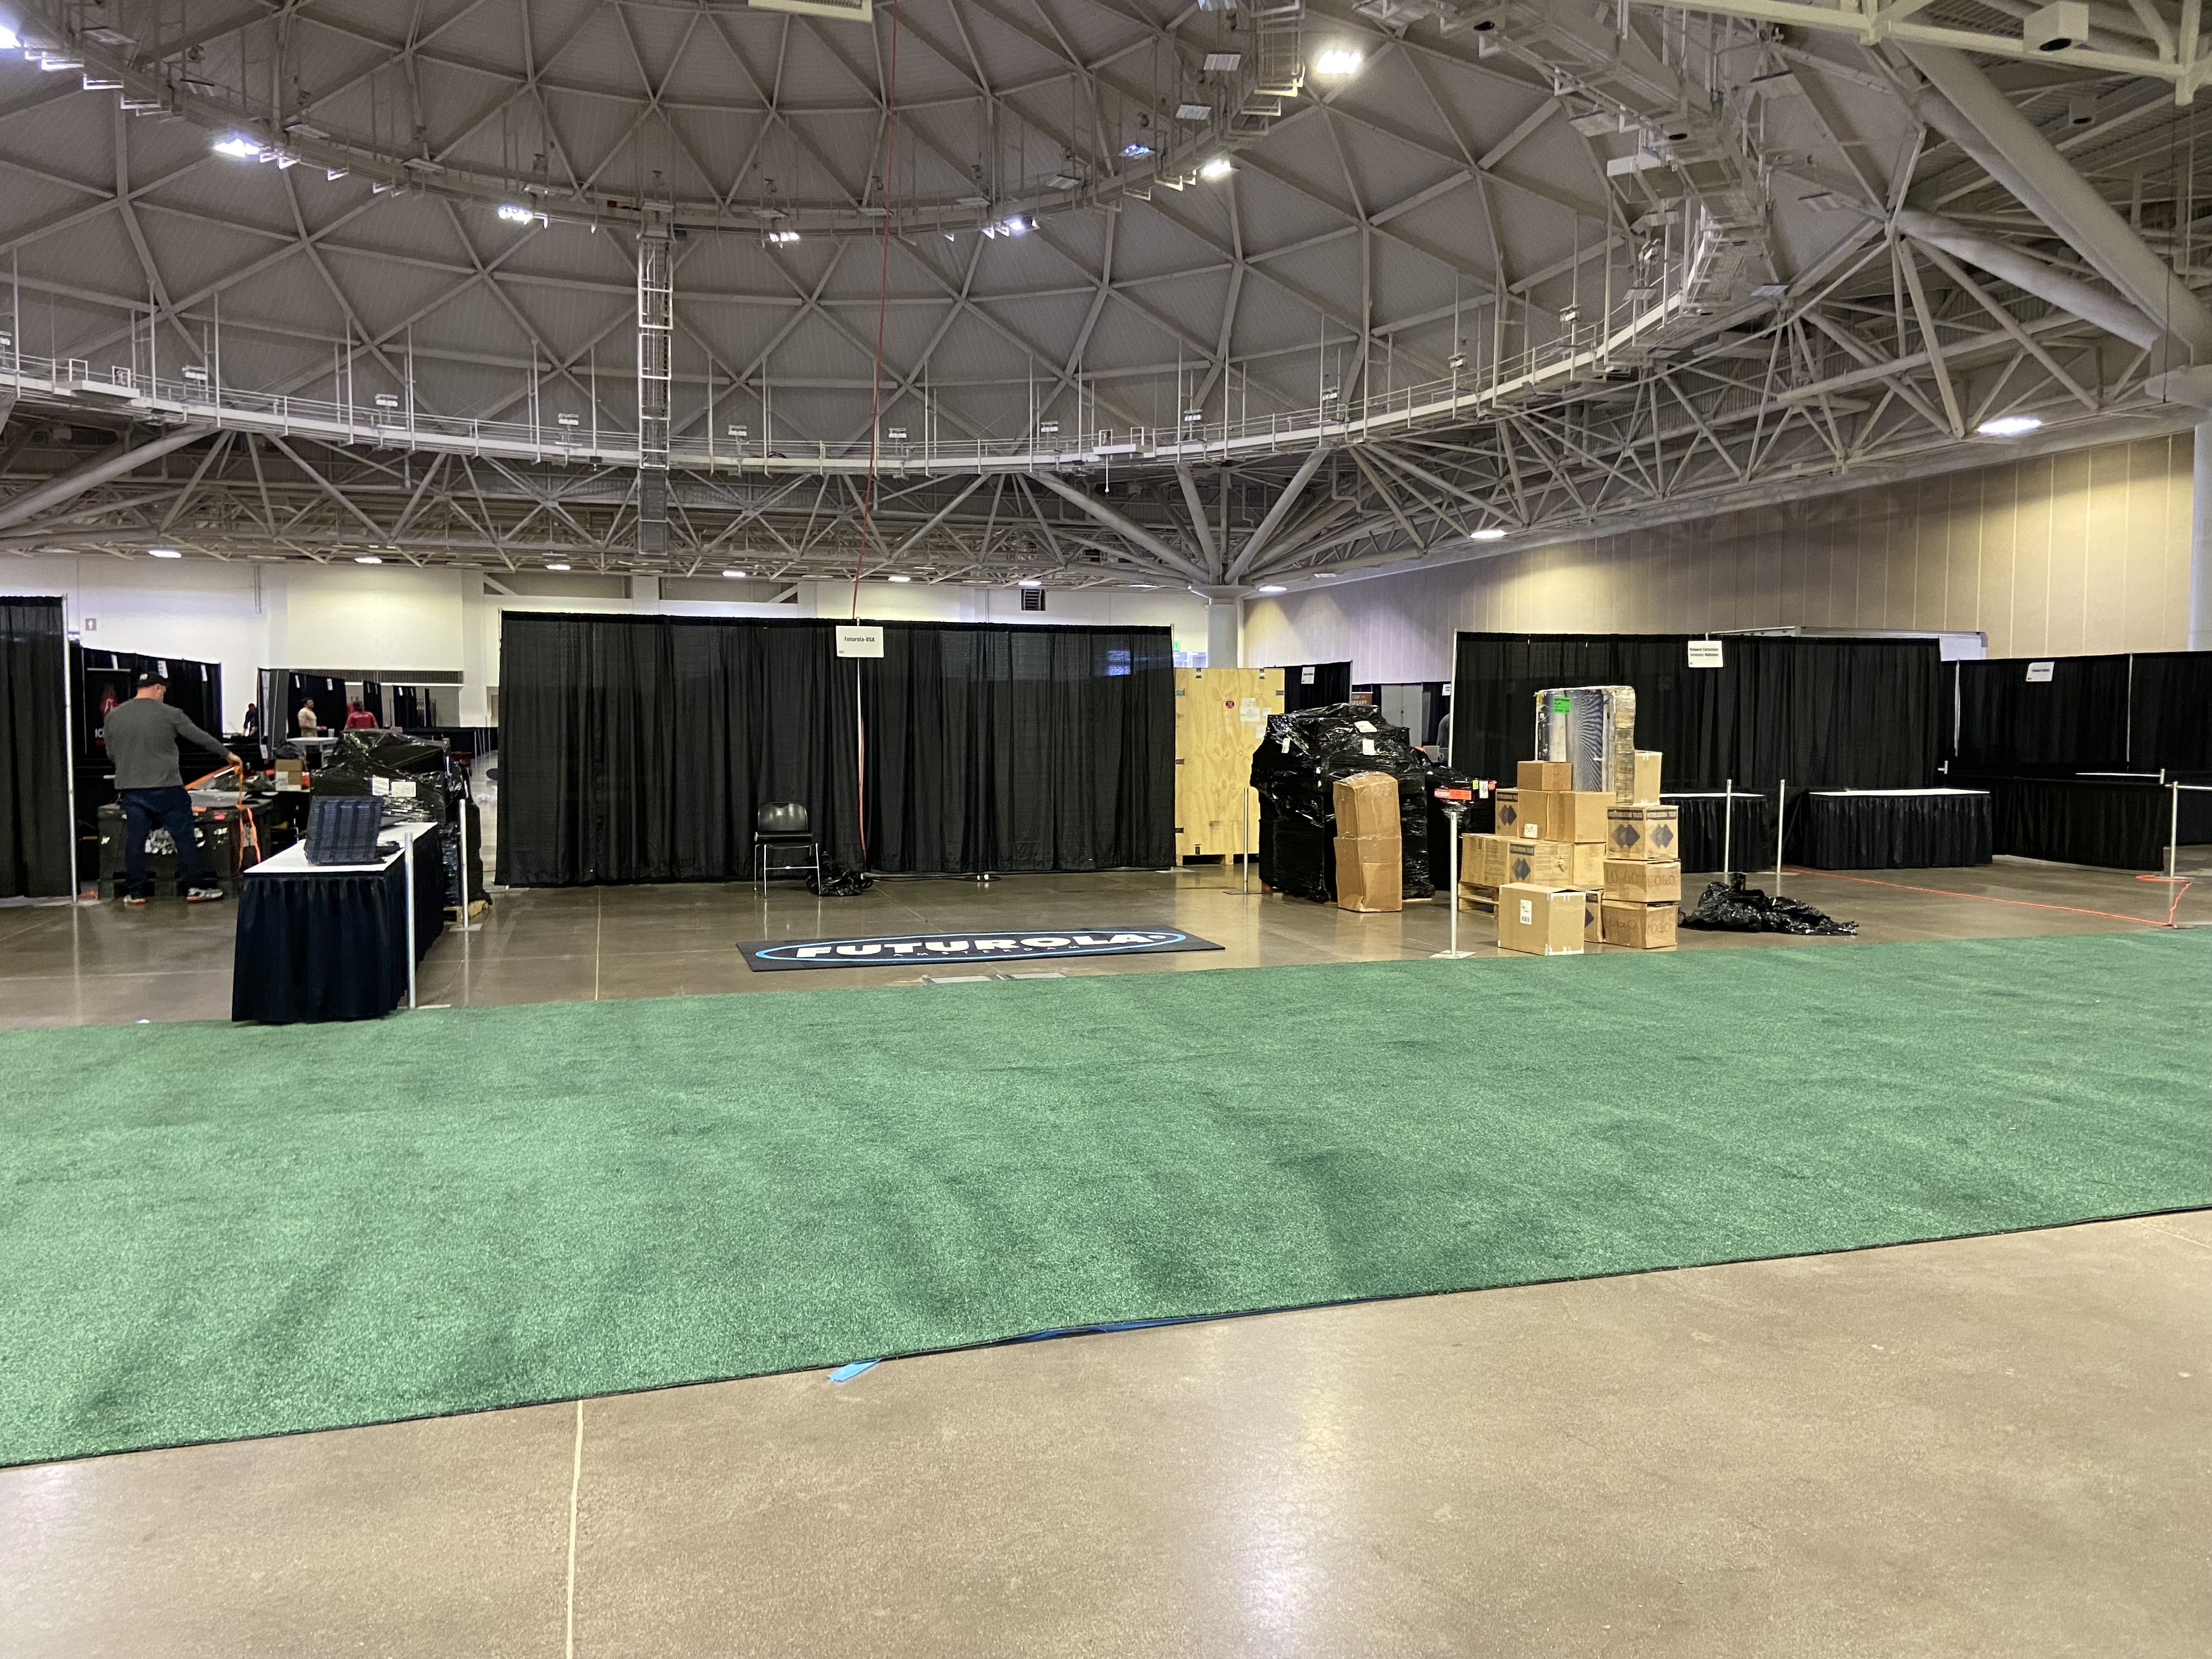 Lucky Leaf Cannabis Expo coming to Minneapolis this weekend